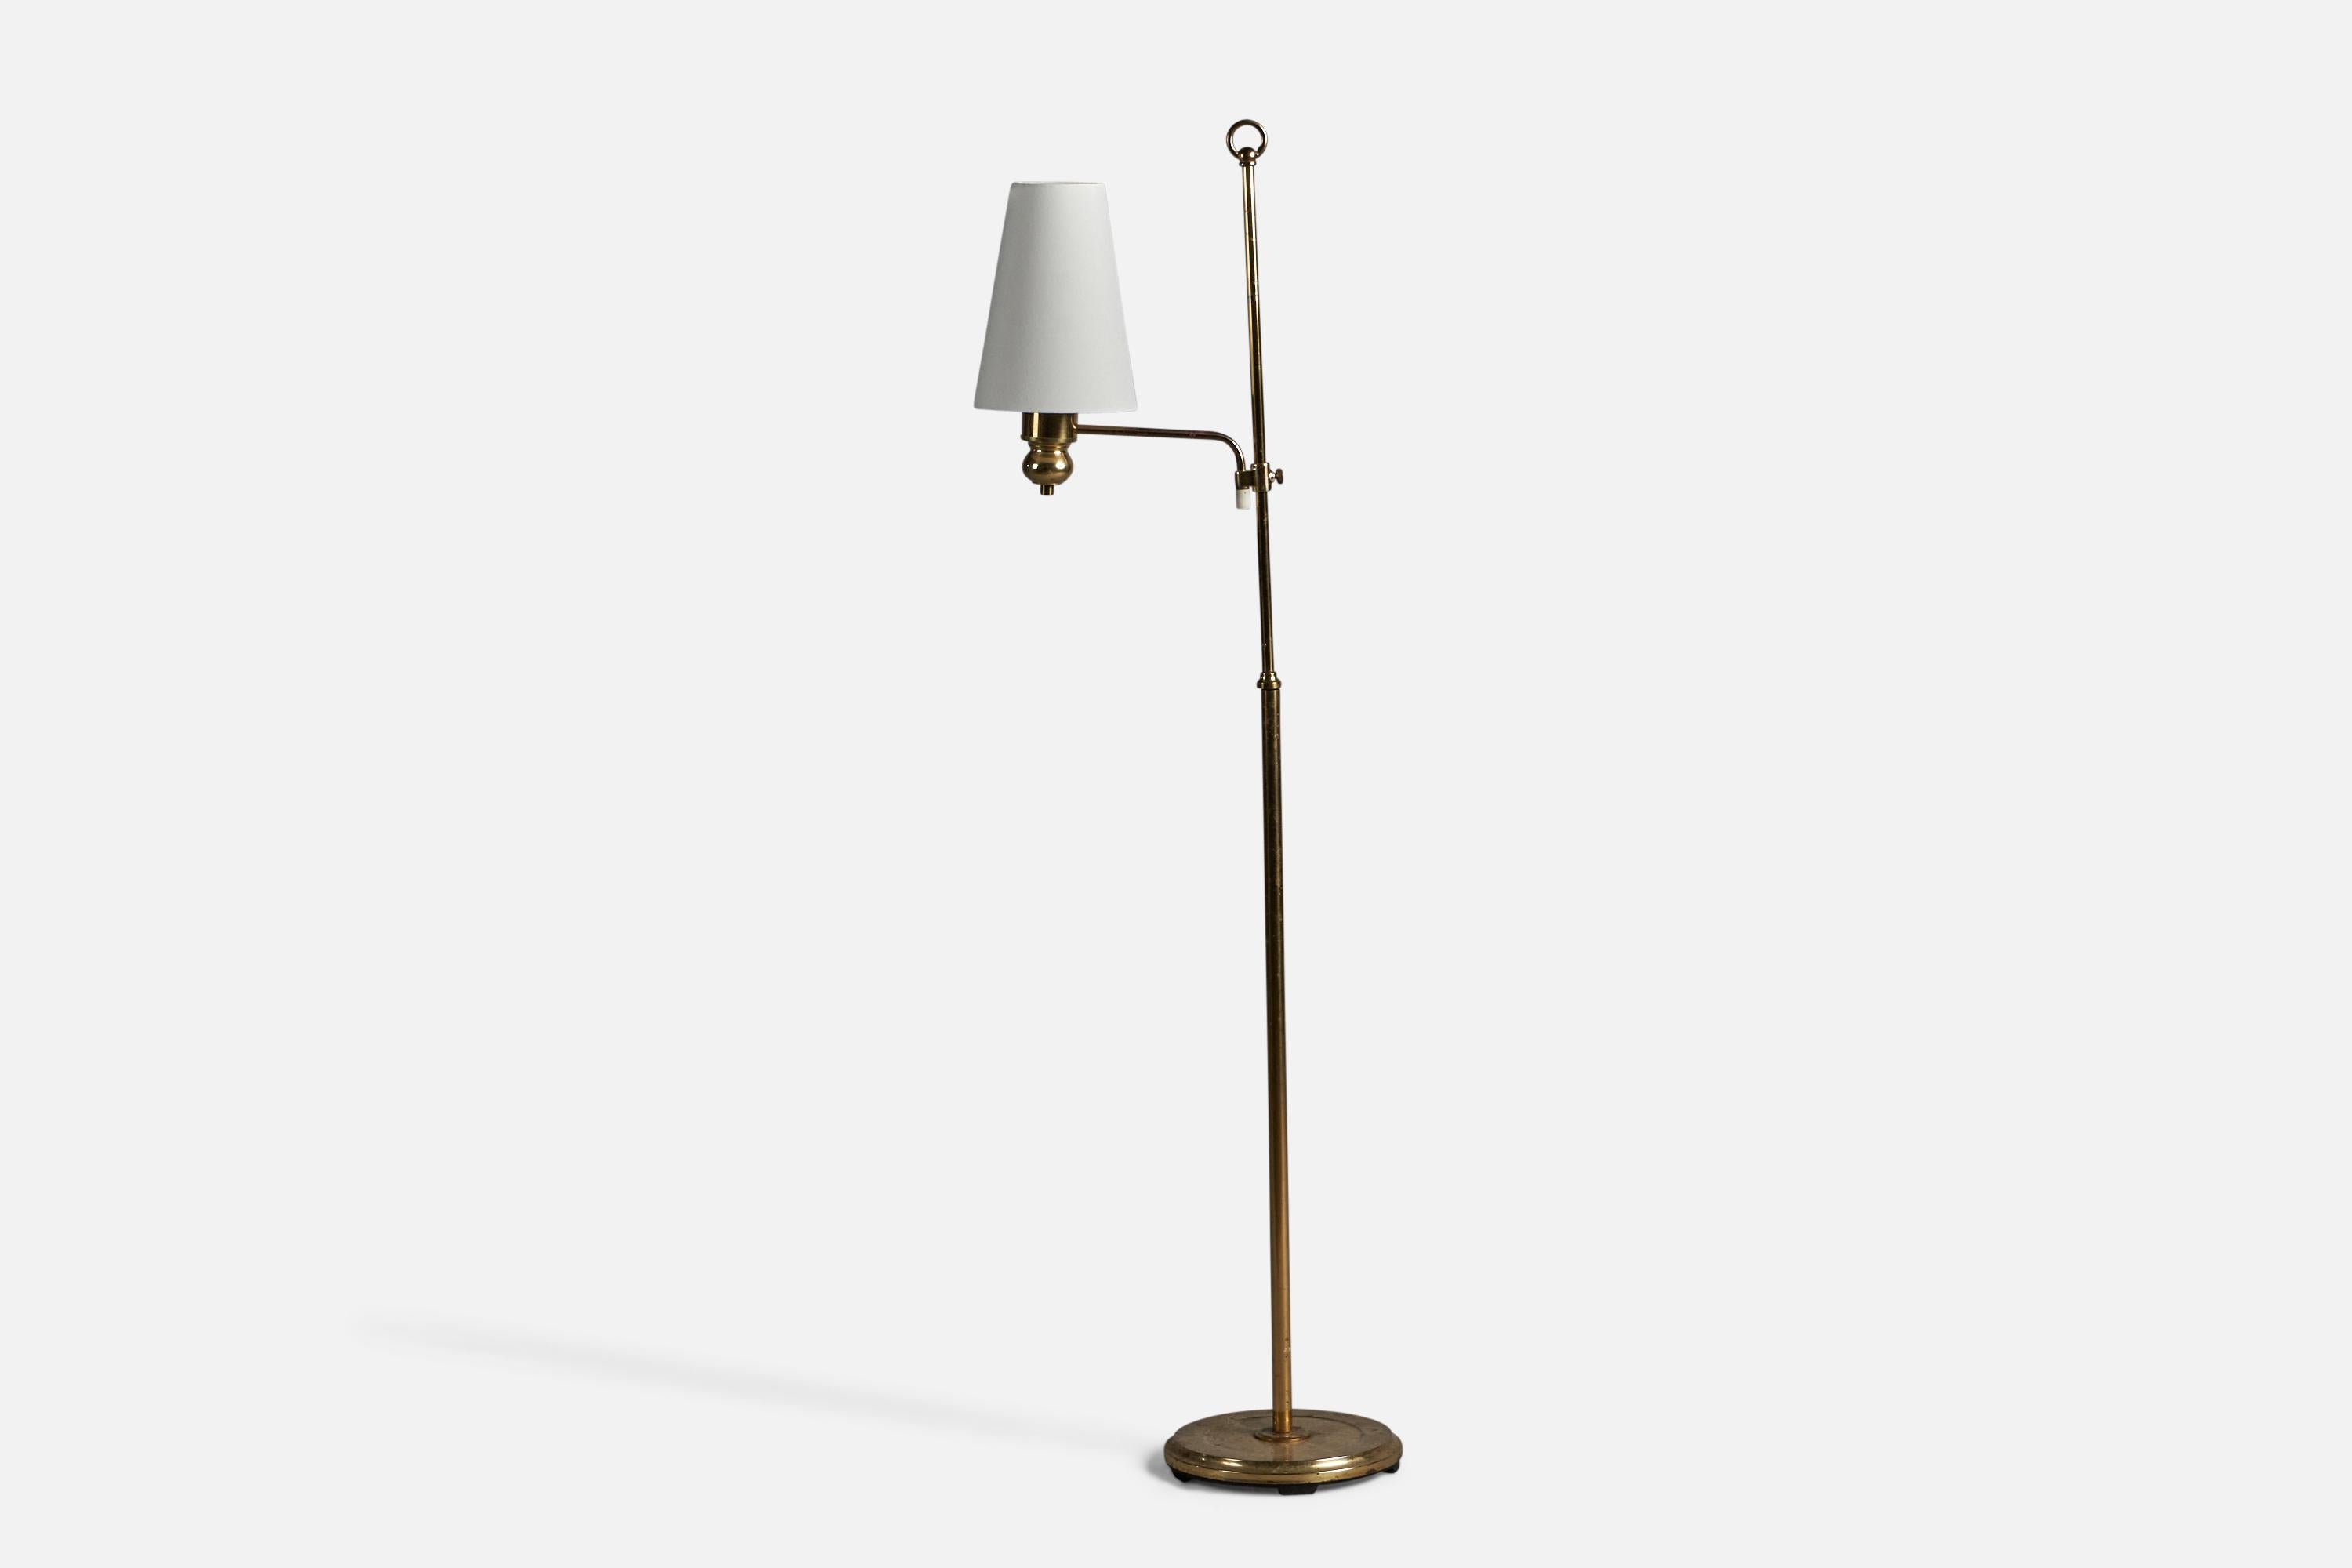 An adjustable brass and white fabric floor lamp, designed and produced by Abo Randers, Denmark, c. 1960s.

Overall Dimensions (inches): 53